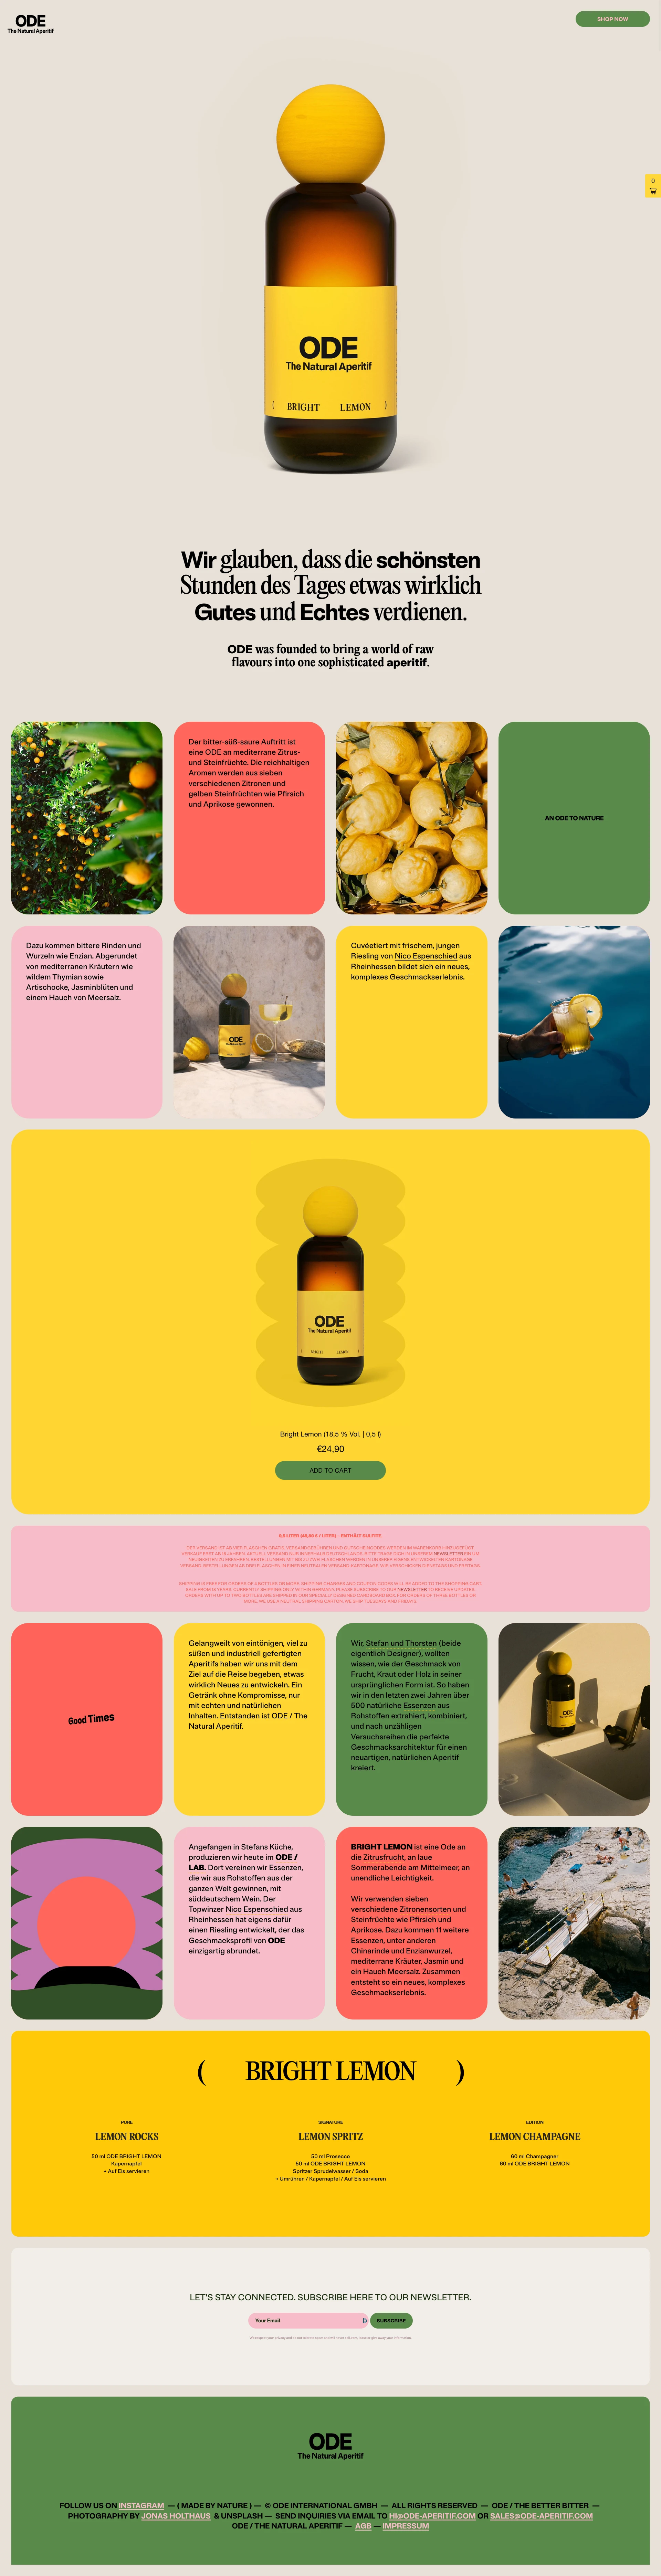 ODE Landing Page Example: ODE was founded to bring a world of raw flavours into one sophisticated aperitif.